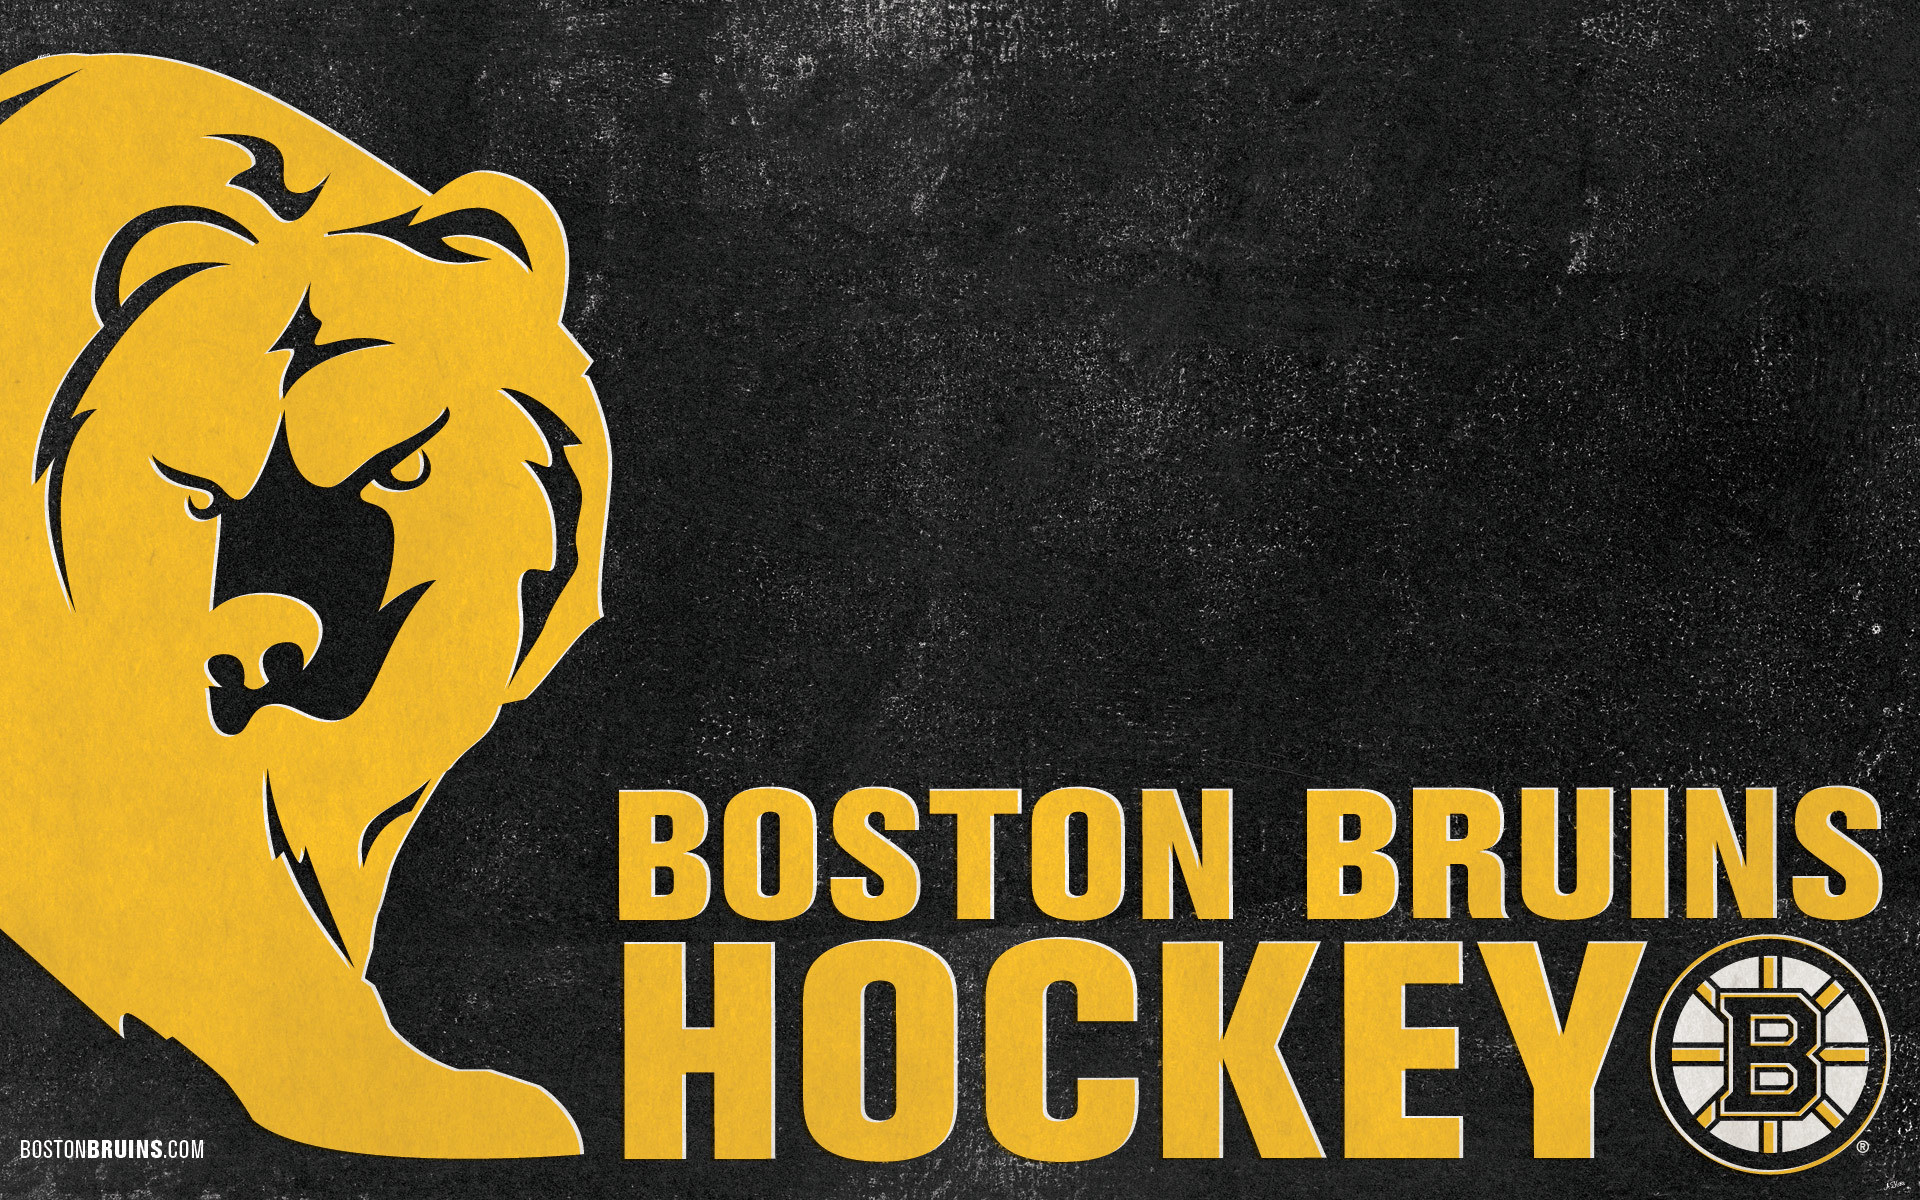 1920x1200 Boston Bruins images Bruins Logo HD wallpaper and background photos